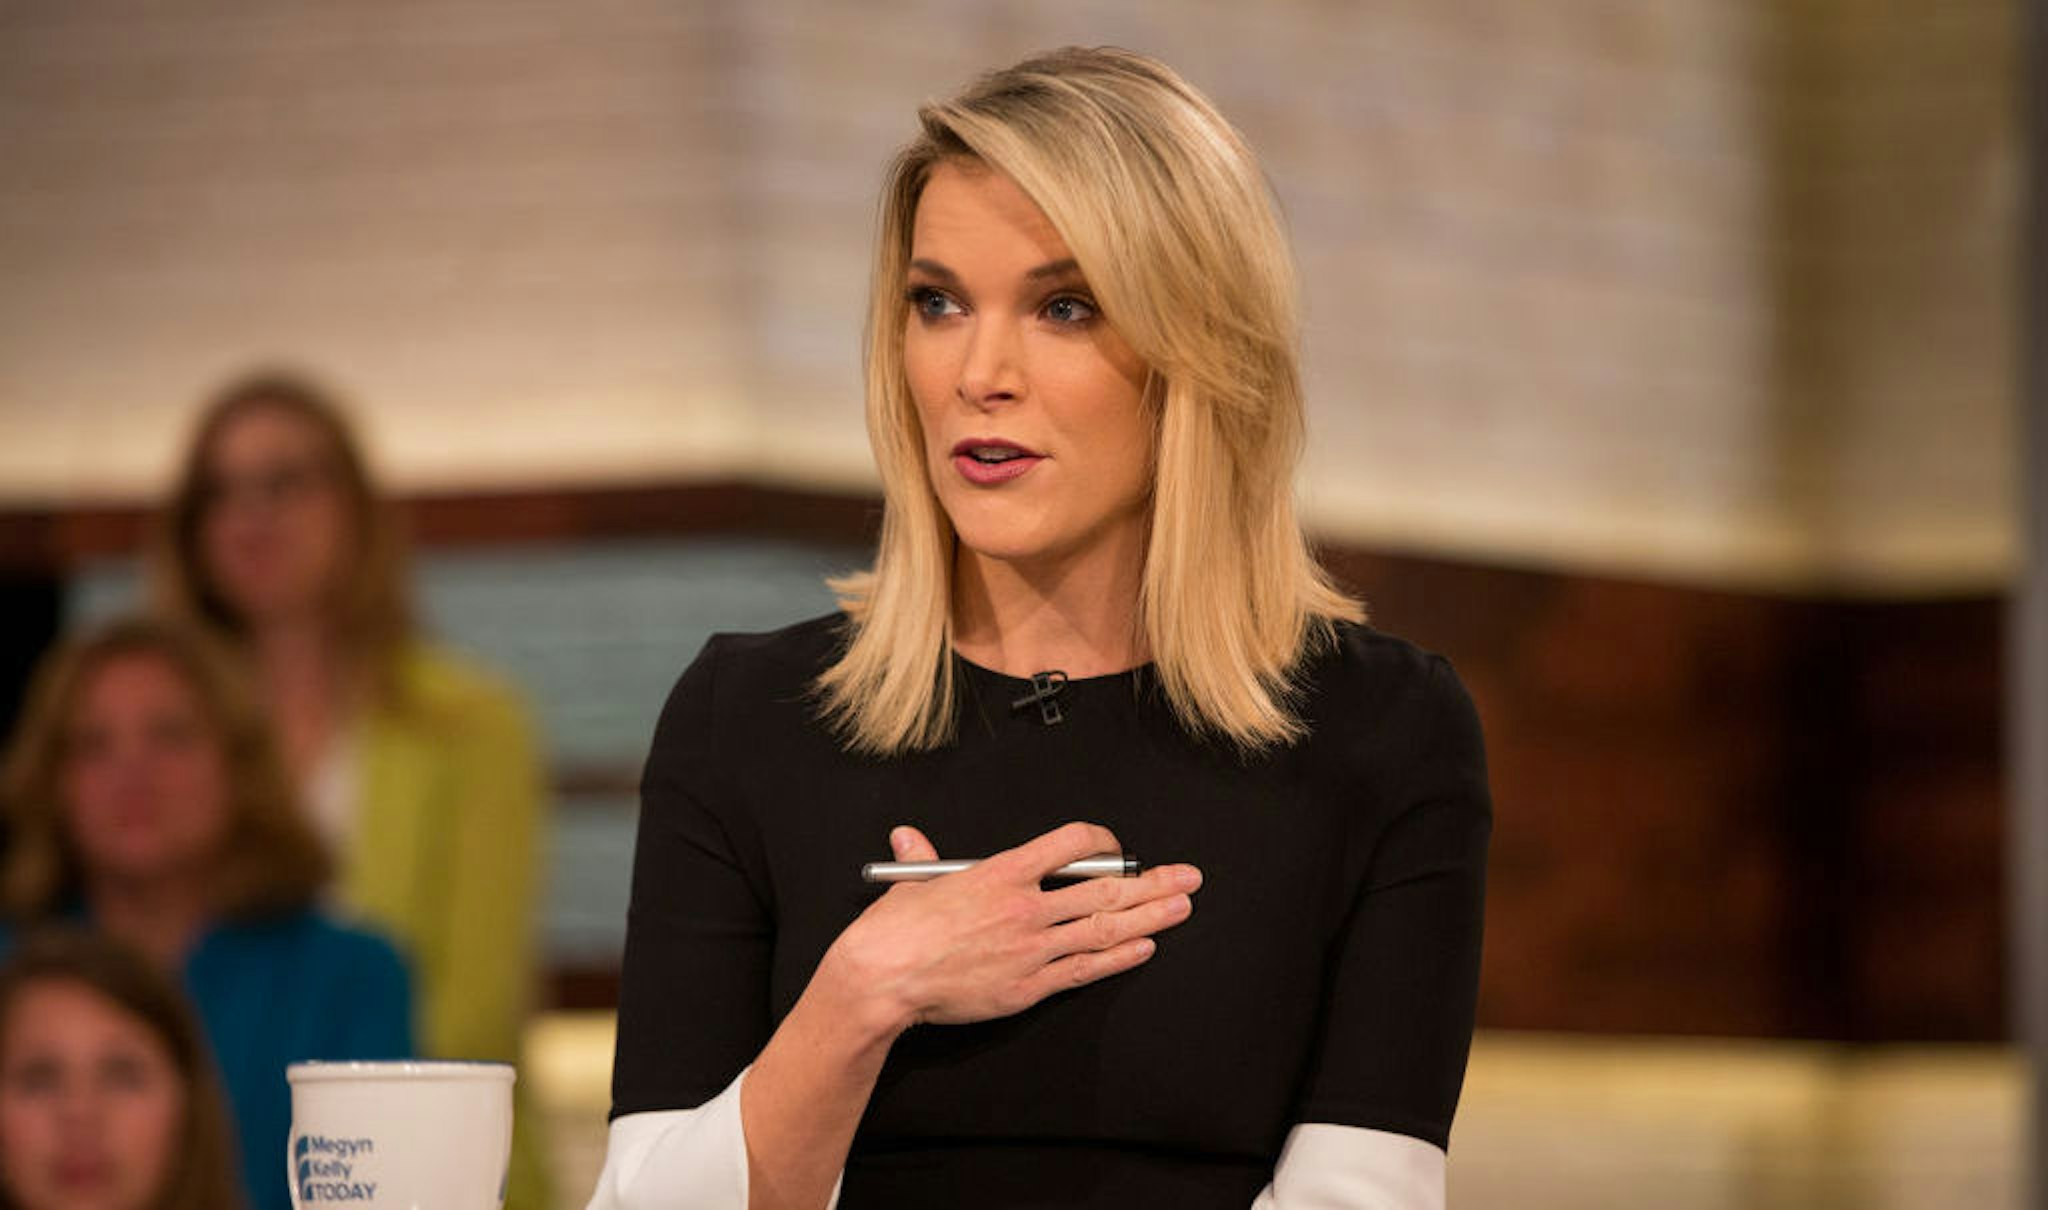 MEGYN KELLY TODAY -- Pictured: Megyn Kelly on Wednesday, August 22, 2018 -- (Photo by: Nathan Congleton/NBC/NBCU Photo Bank)